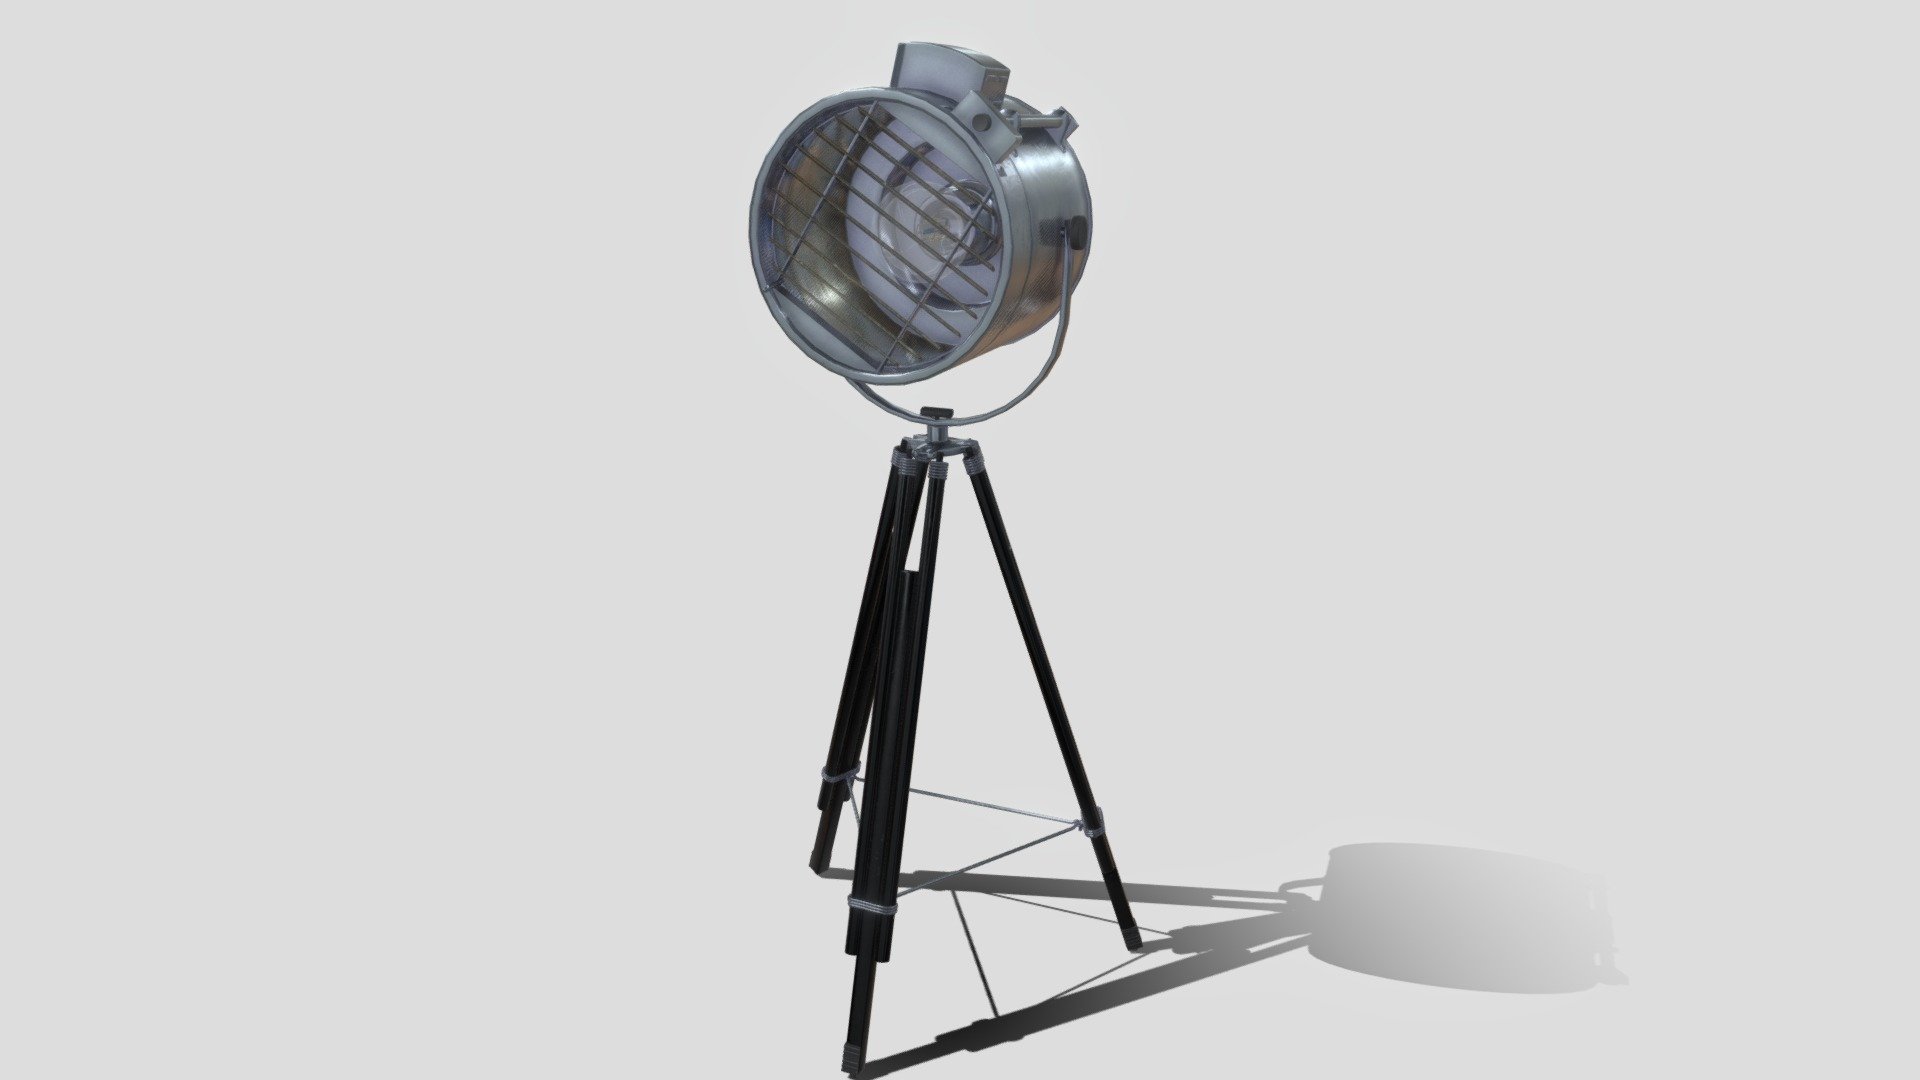 This is a floor lamp in the style of a stage or spot light. It has a chrome head, and black metal legs. 

This prop can be placed in a studio, livingroom, gallery or anywhere you need a nice detail for interior design 3d model